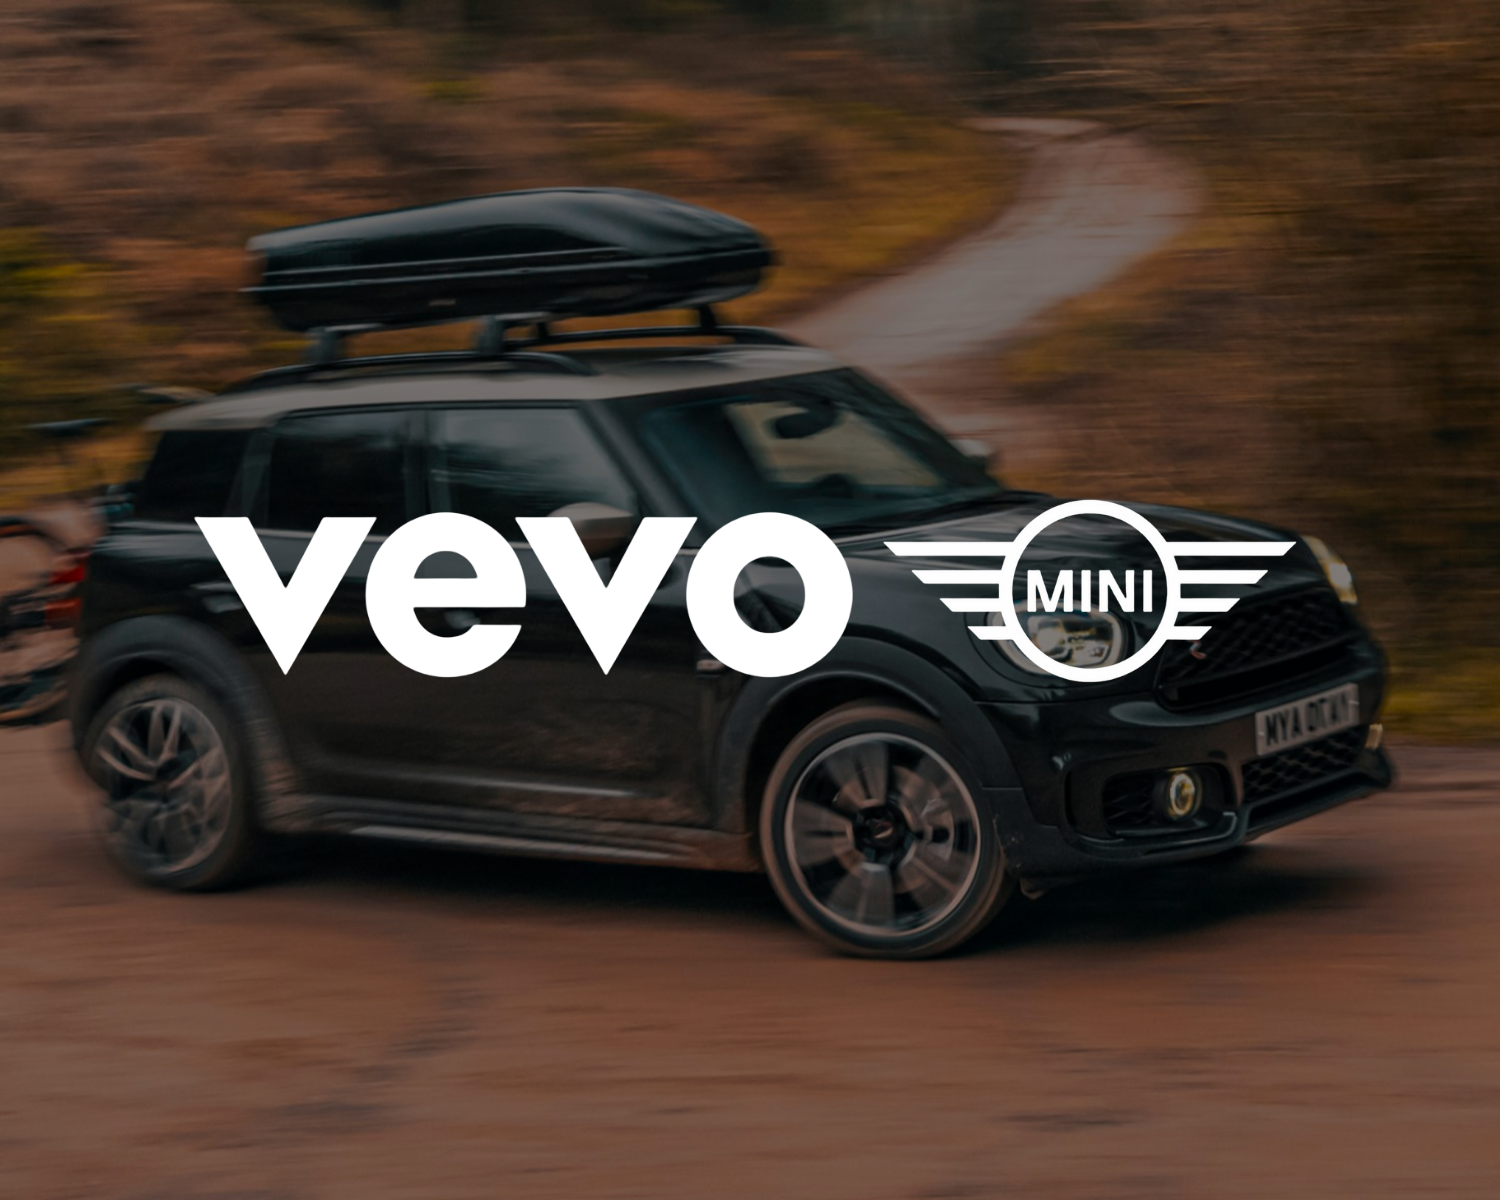 Image of the VEVO MINI, one of the global brands using Beatgrid's cross-media audience measurement solutions